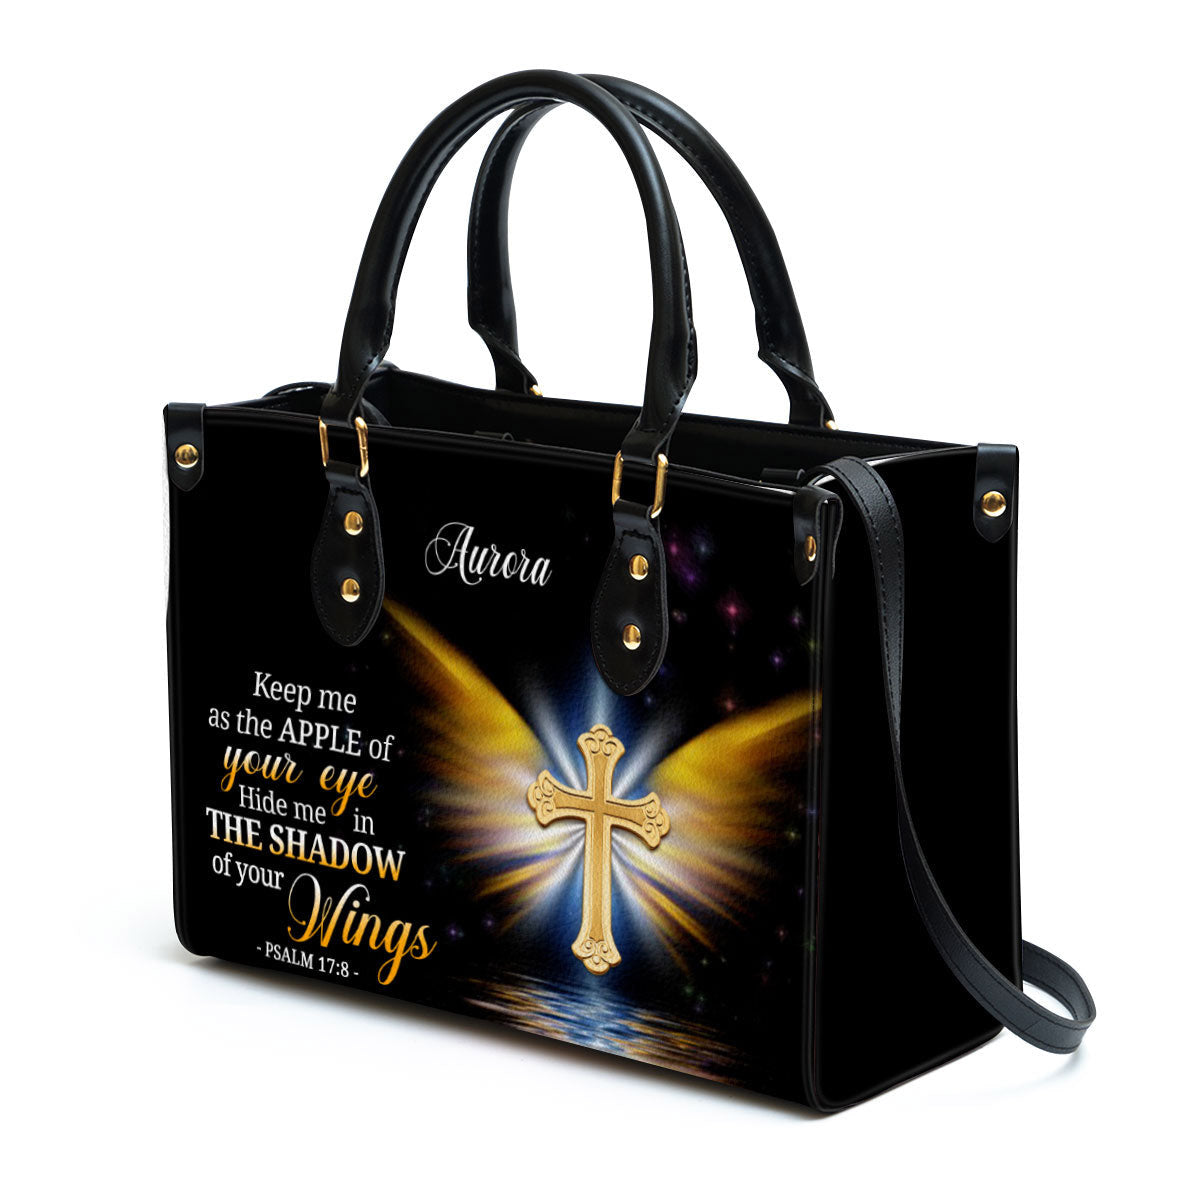 Hide Me In The Shadow Of Your Wings Psalm 17 8 Leather Bag - Personalized Leather Bible Handbag - Christian Gifts for Women